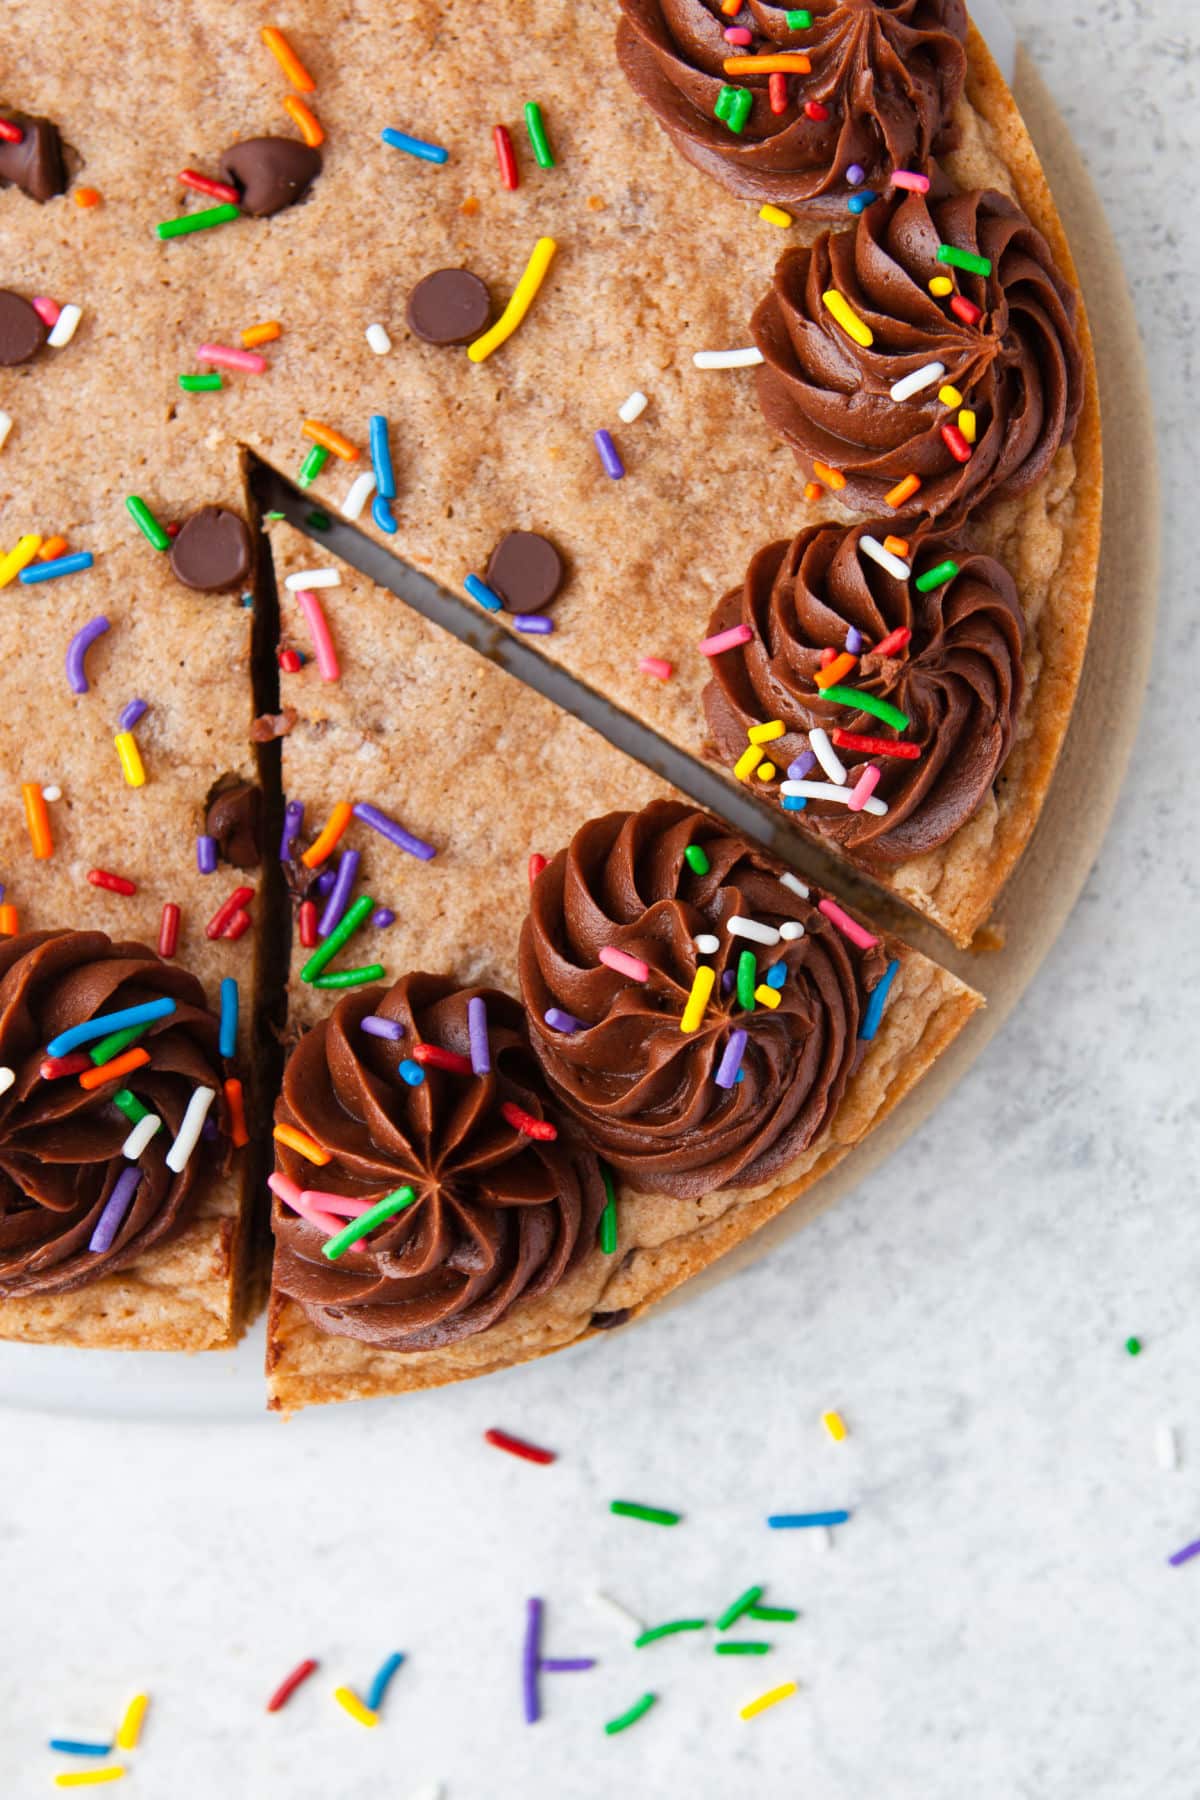 A slice of chocolate chip cookie cake cut into the cake.